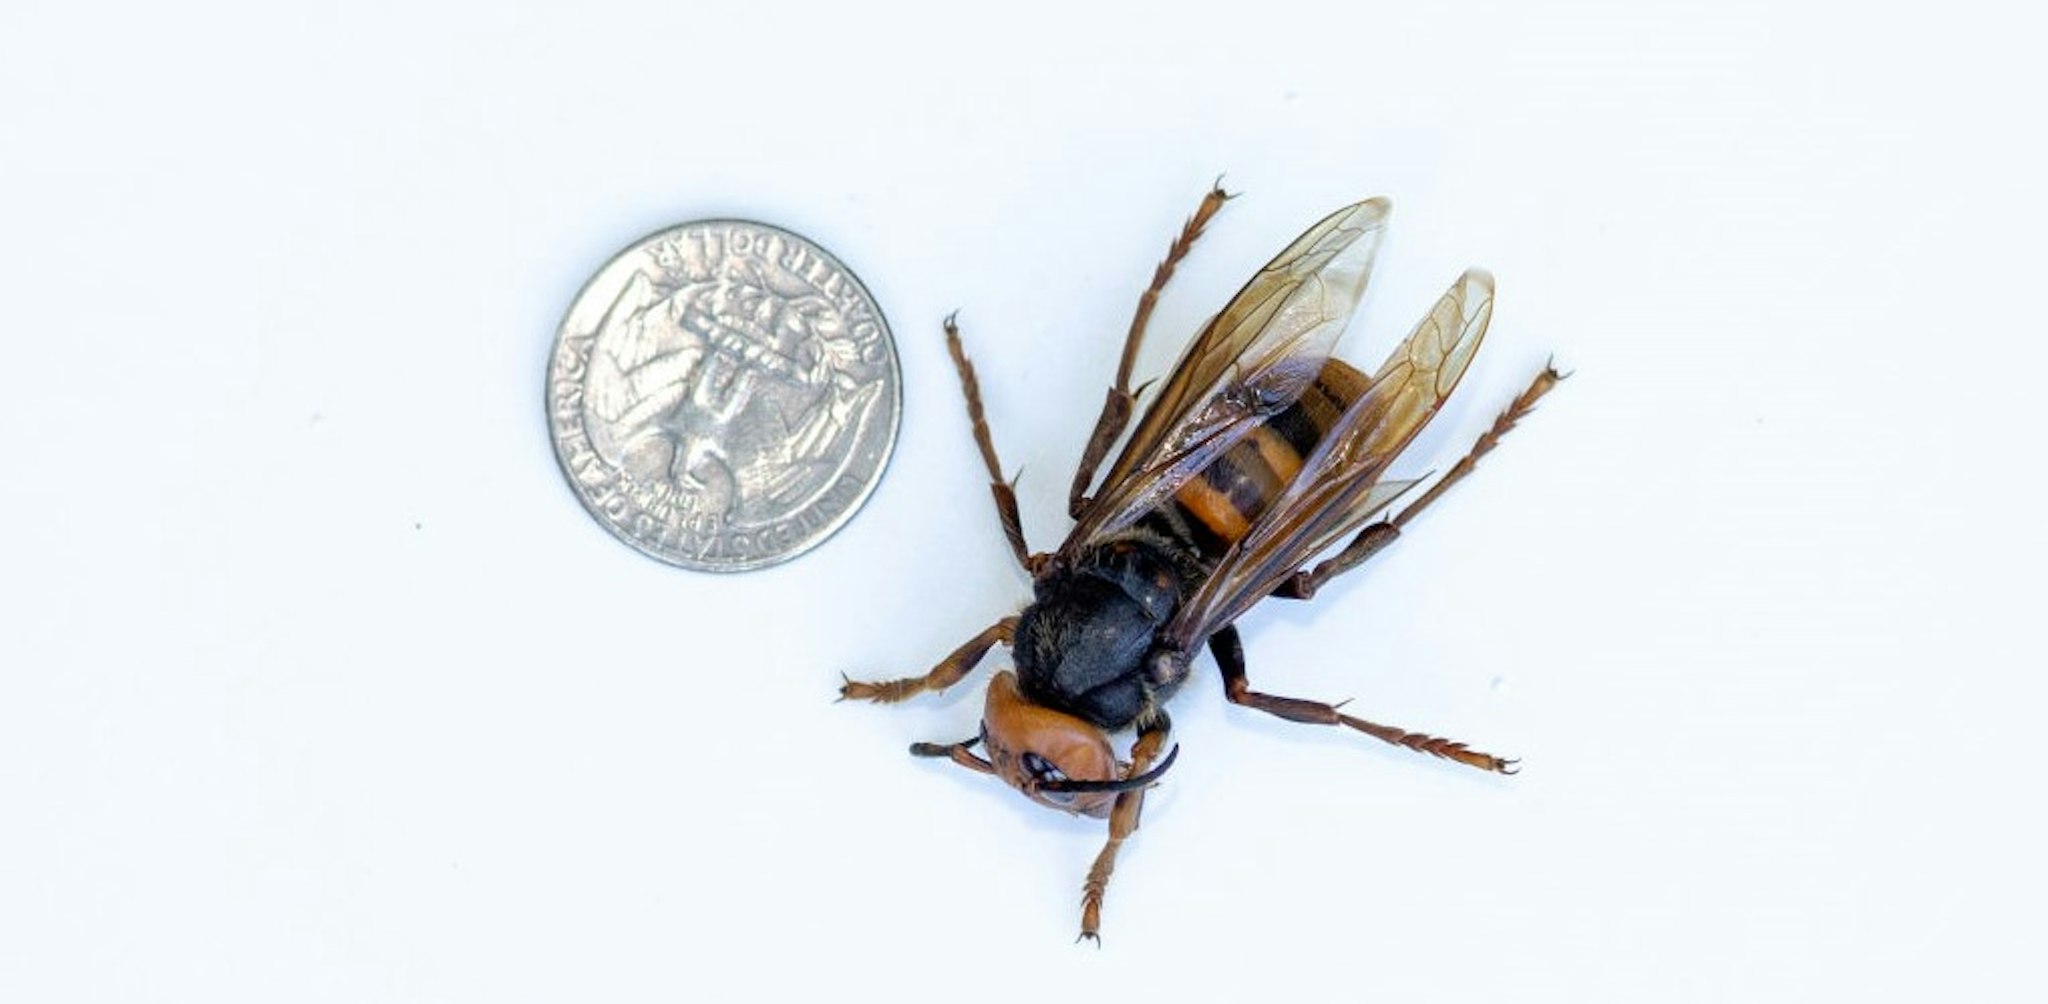 BELLINGHAM, WA - JULY 29: A sample specimen of a dead Asian Giant Hornet from Japan, also known as a murder hornet, is shown next to a U.S. quarter on July 29, 2020 in Bellingham, Washington. Asian giant hornets attack and destroy honeybee hives. The Washington State Department of Agriculture (WSDA) currently has 442 traps throughout the state. To date, five Asian Giant Hornets have been found in Washington state, all by public citizens in Whatcom County. (Photo by